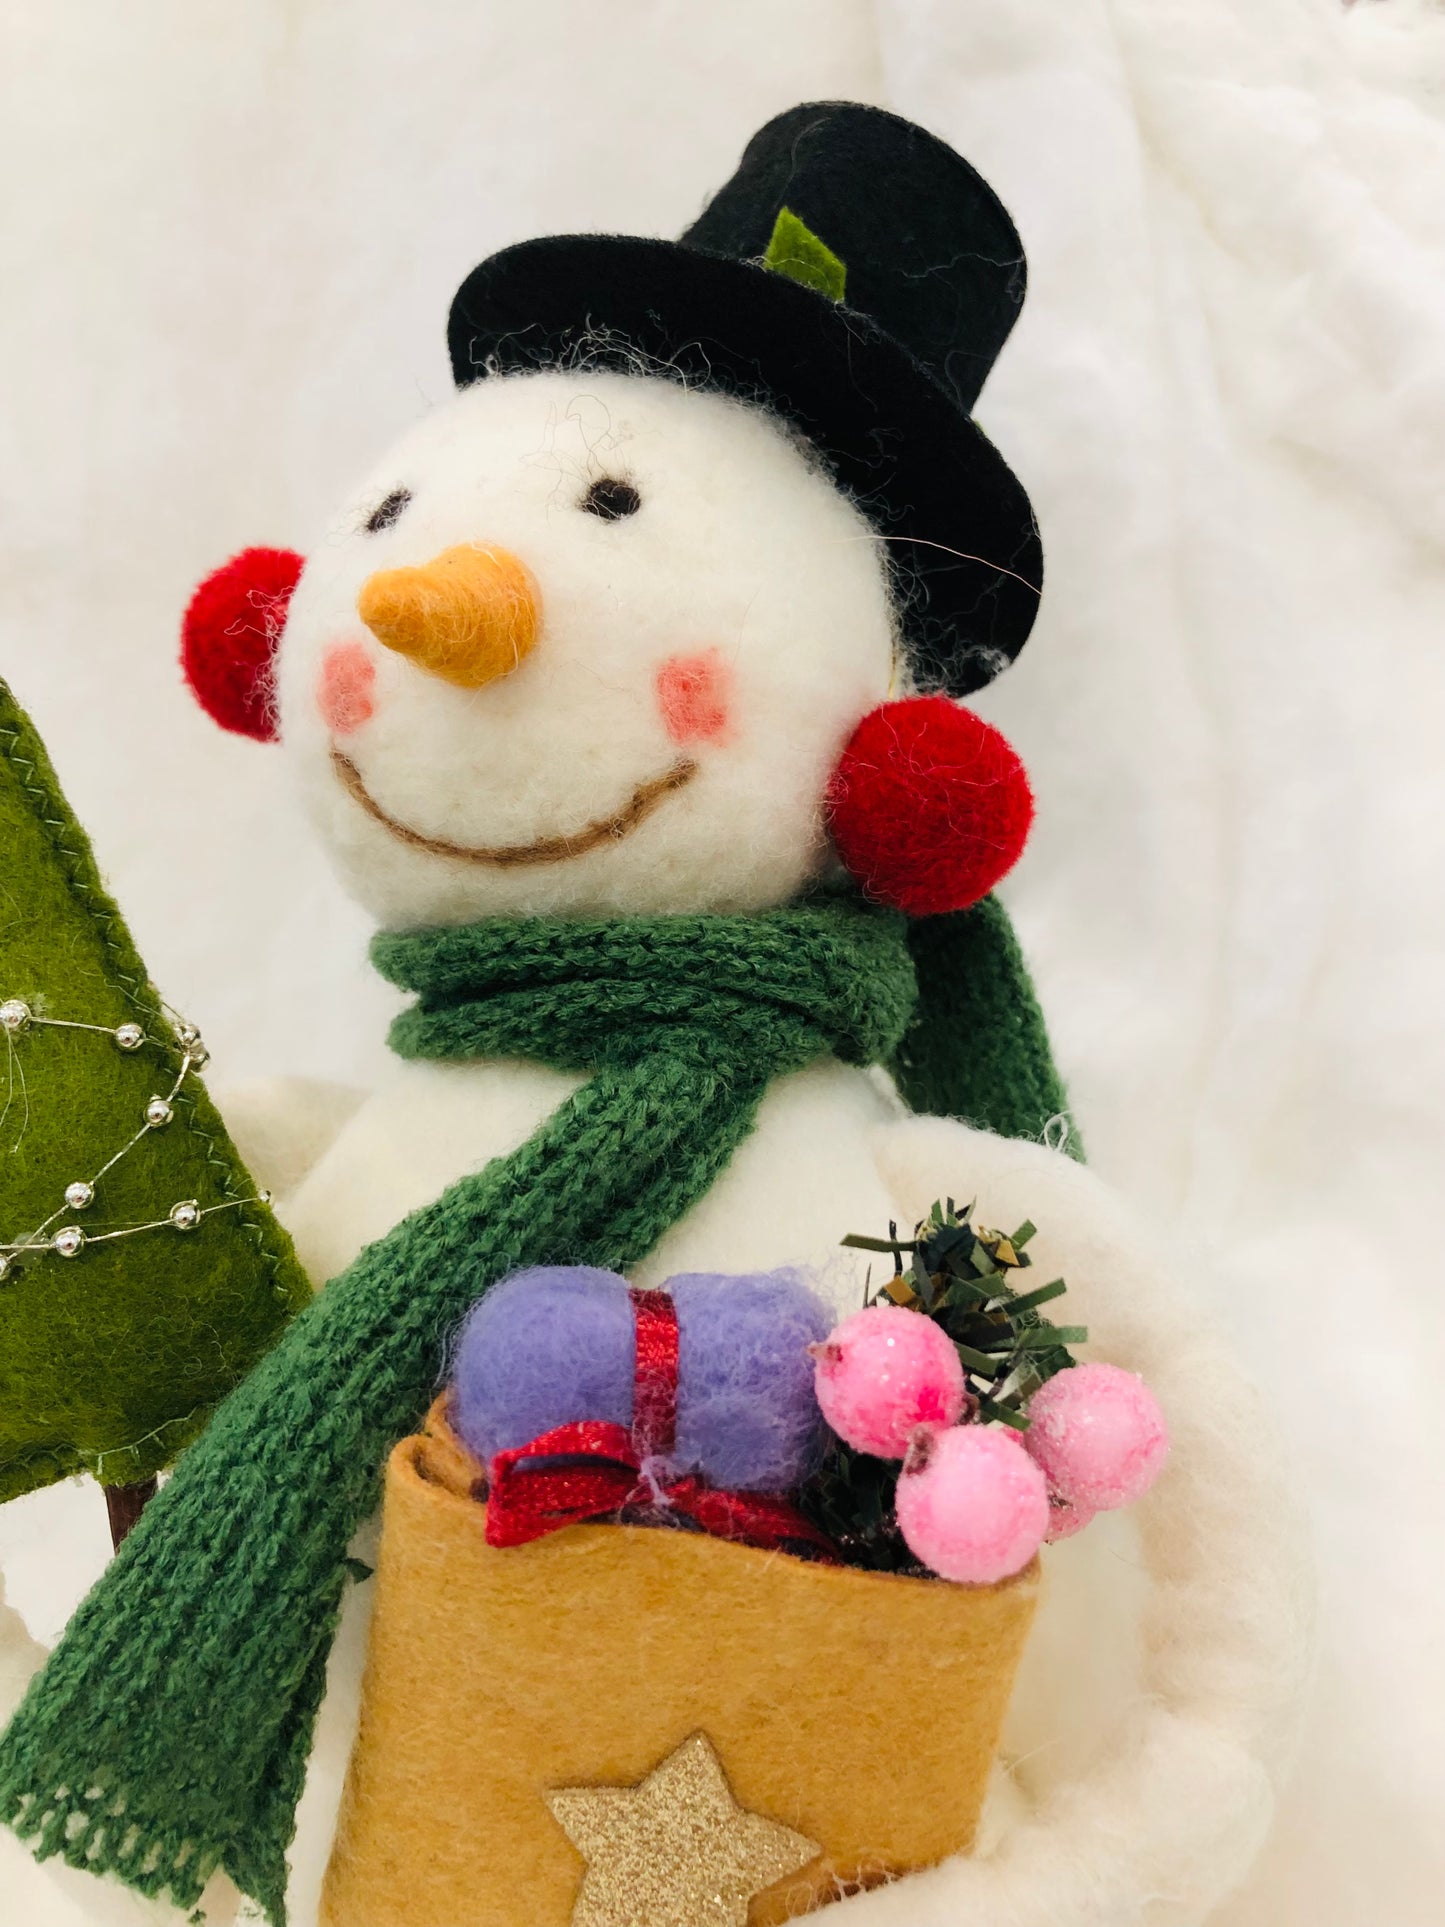 Felt Snowman with Top Hat and Ear Muffs; 14" high